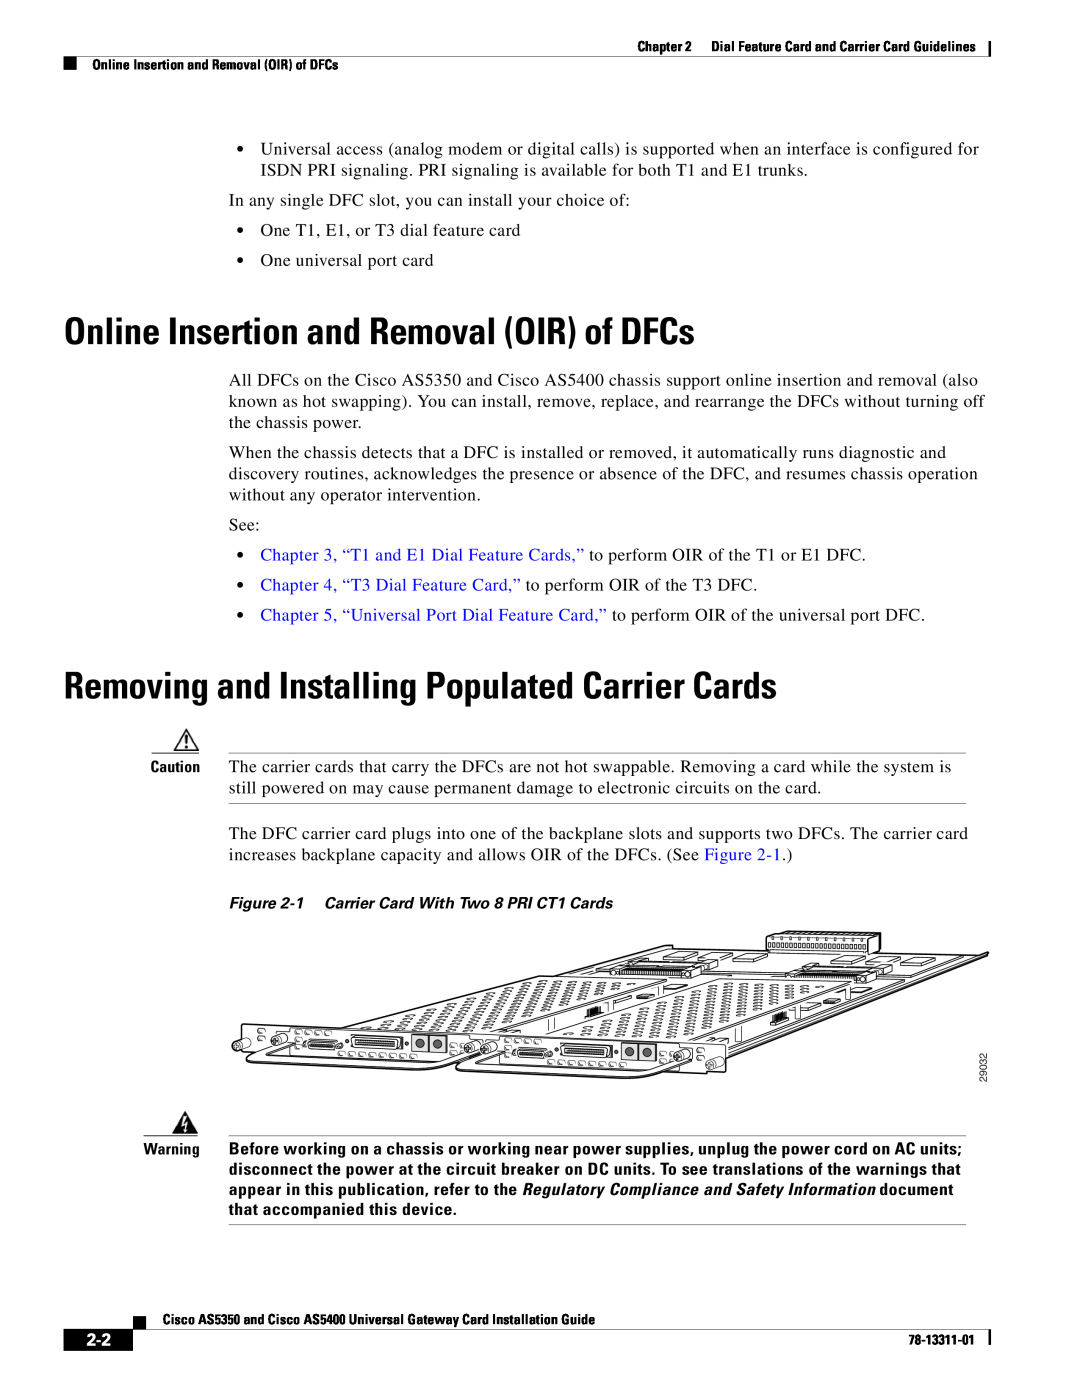 Cisco Systems AS5400, AS5350 Online Insertion and Removal OIR of DFCs, Removing and Installing Populated Carrier Cards 